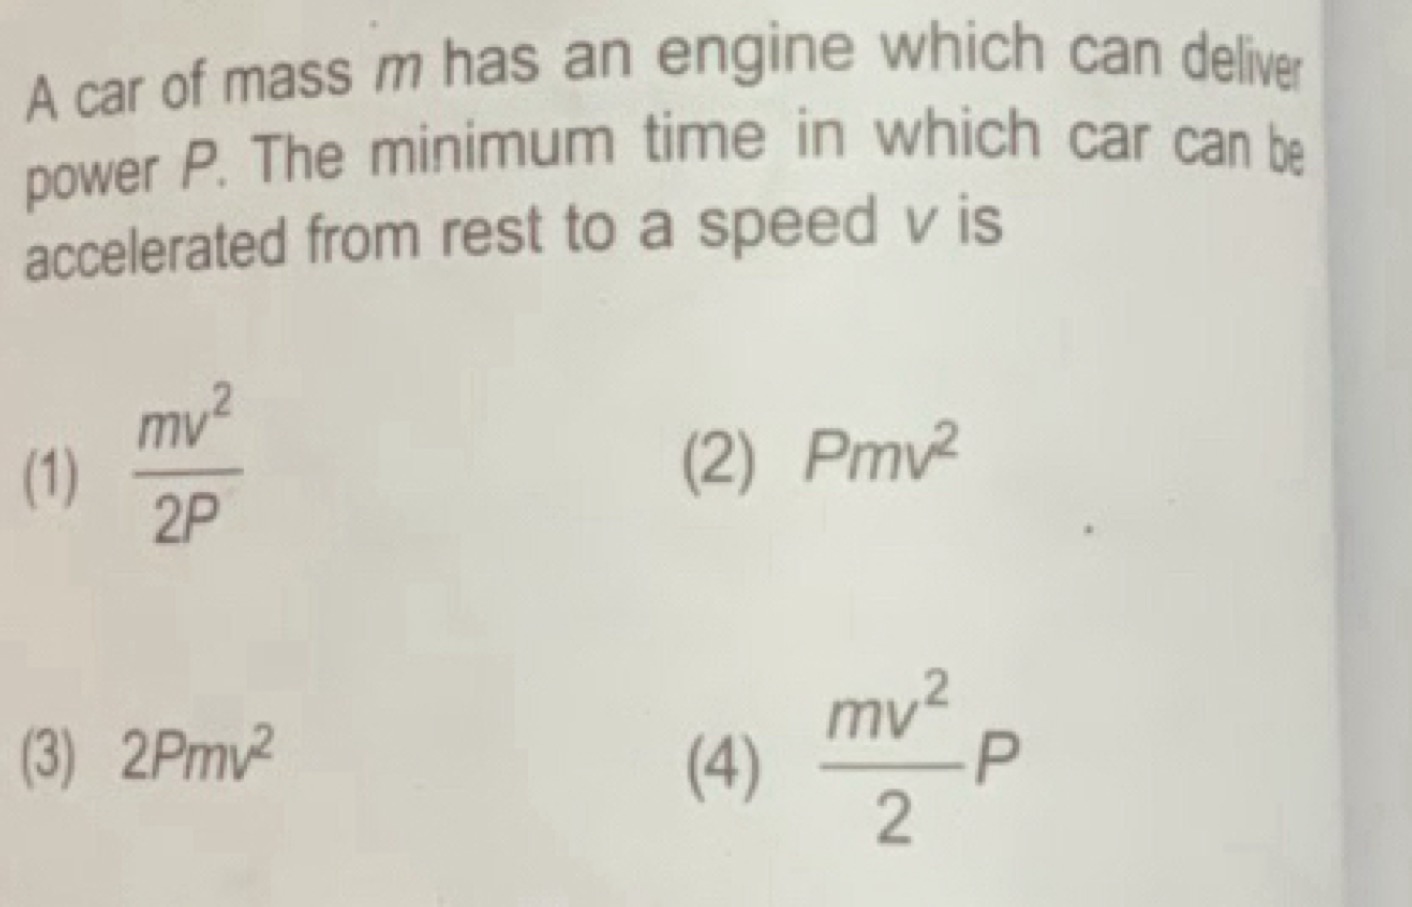 A car of mass m has an engine which can deliver power P. The minimum t